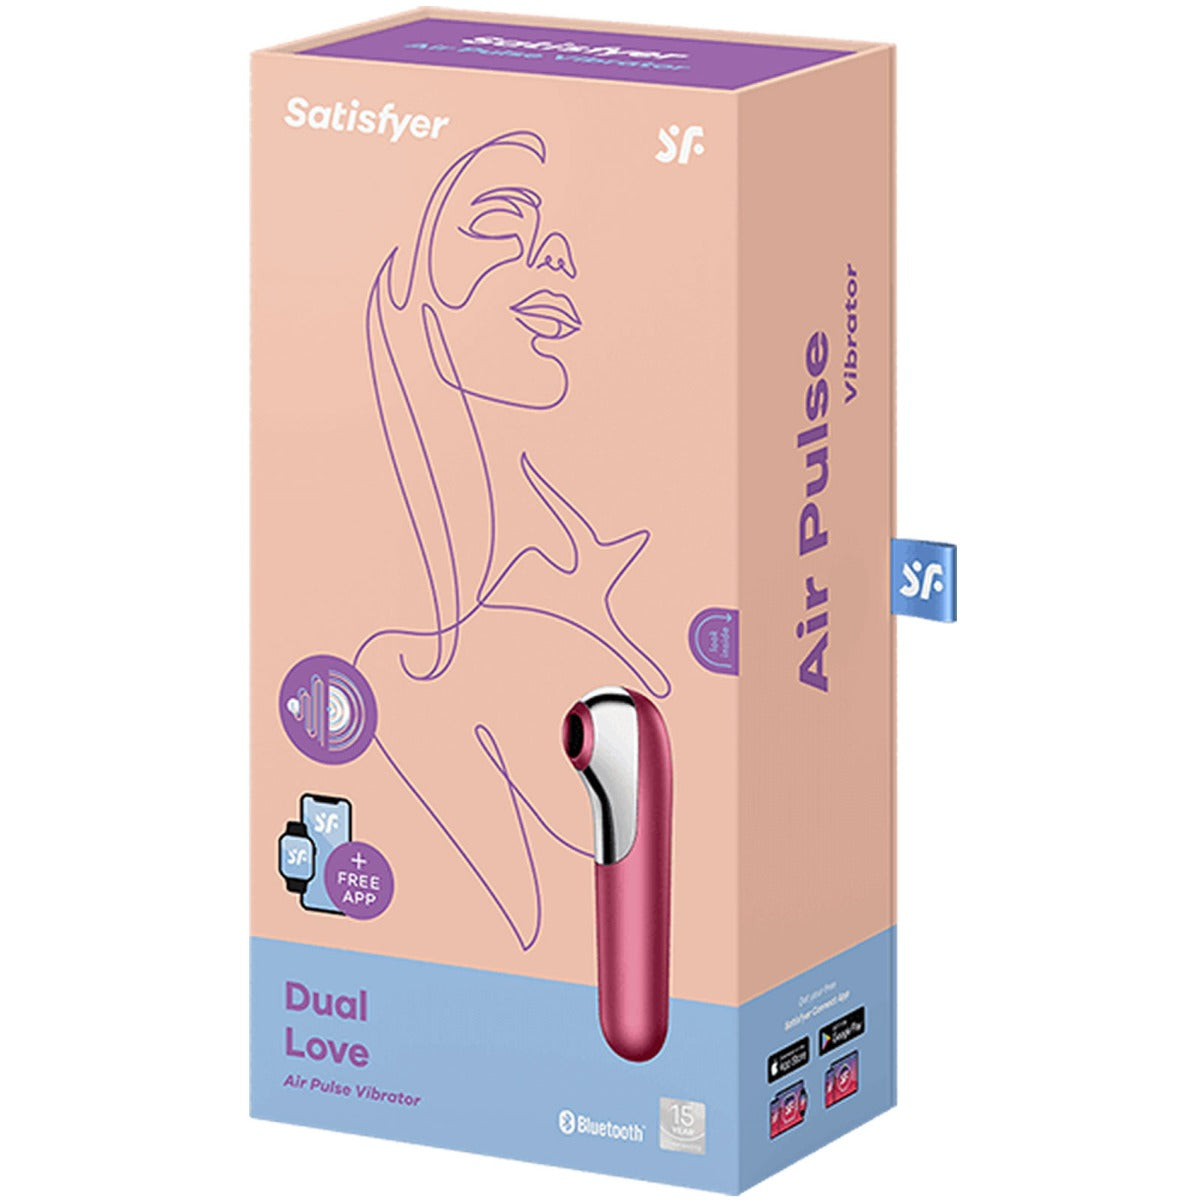 Satisfyer Dual Love Vibrator With Bluetooth And App | Pink